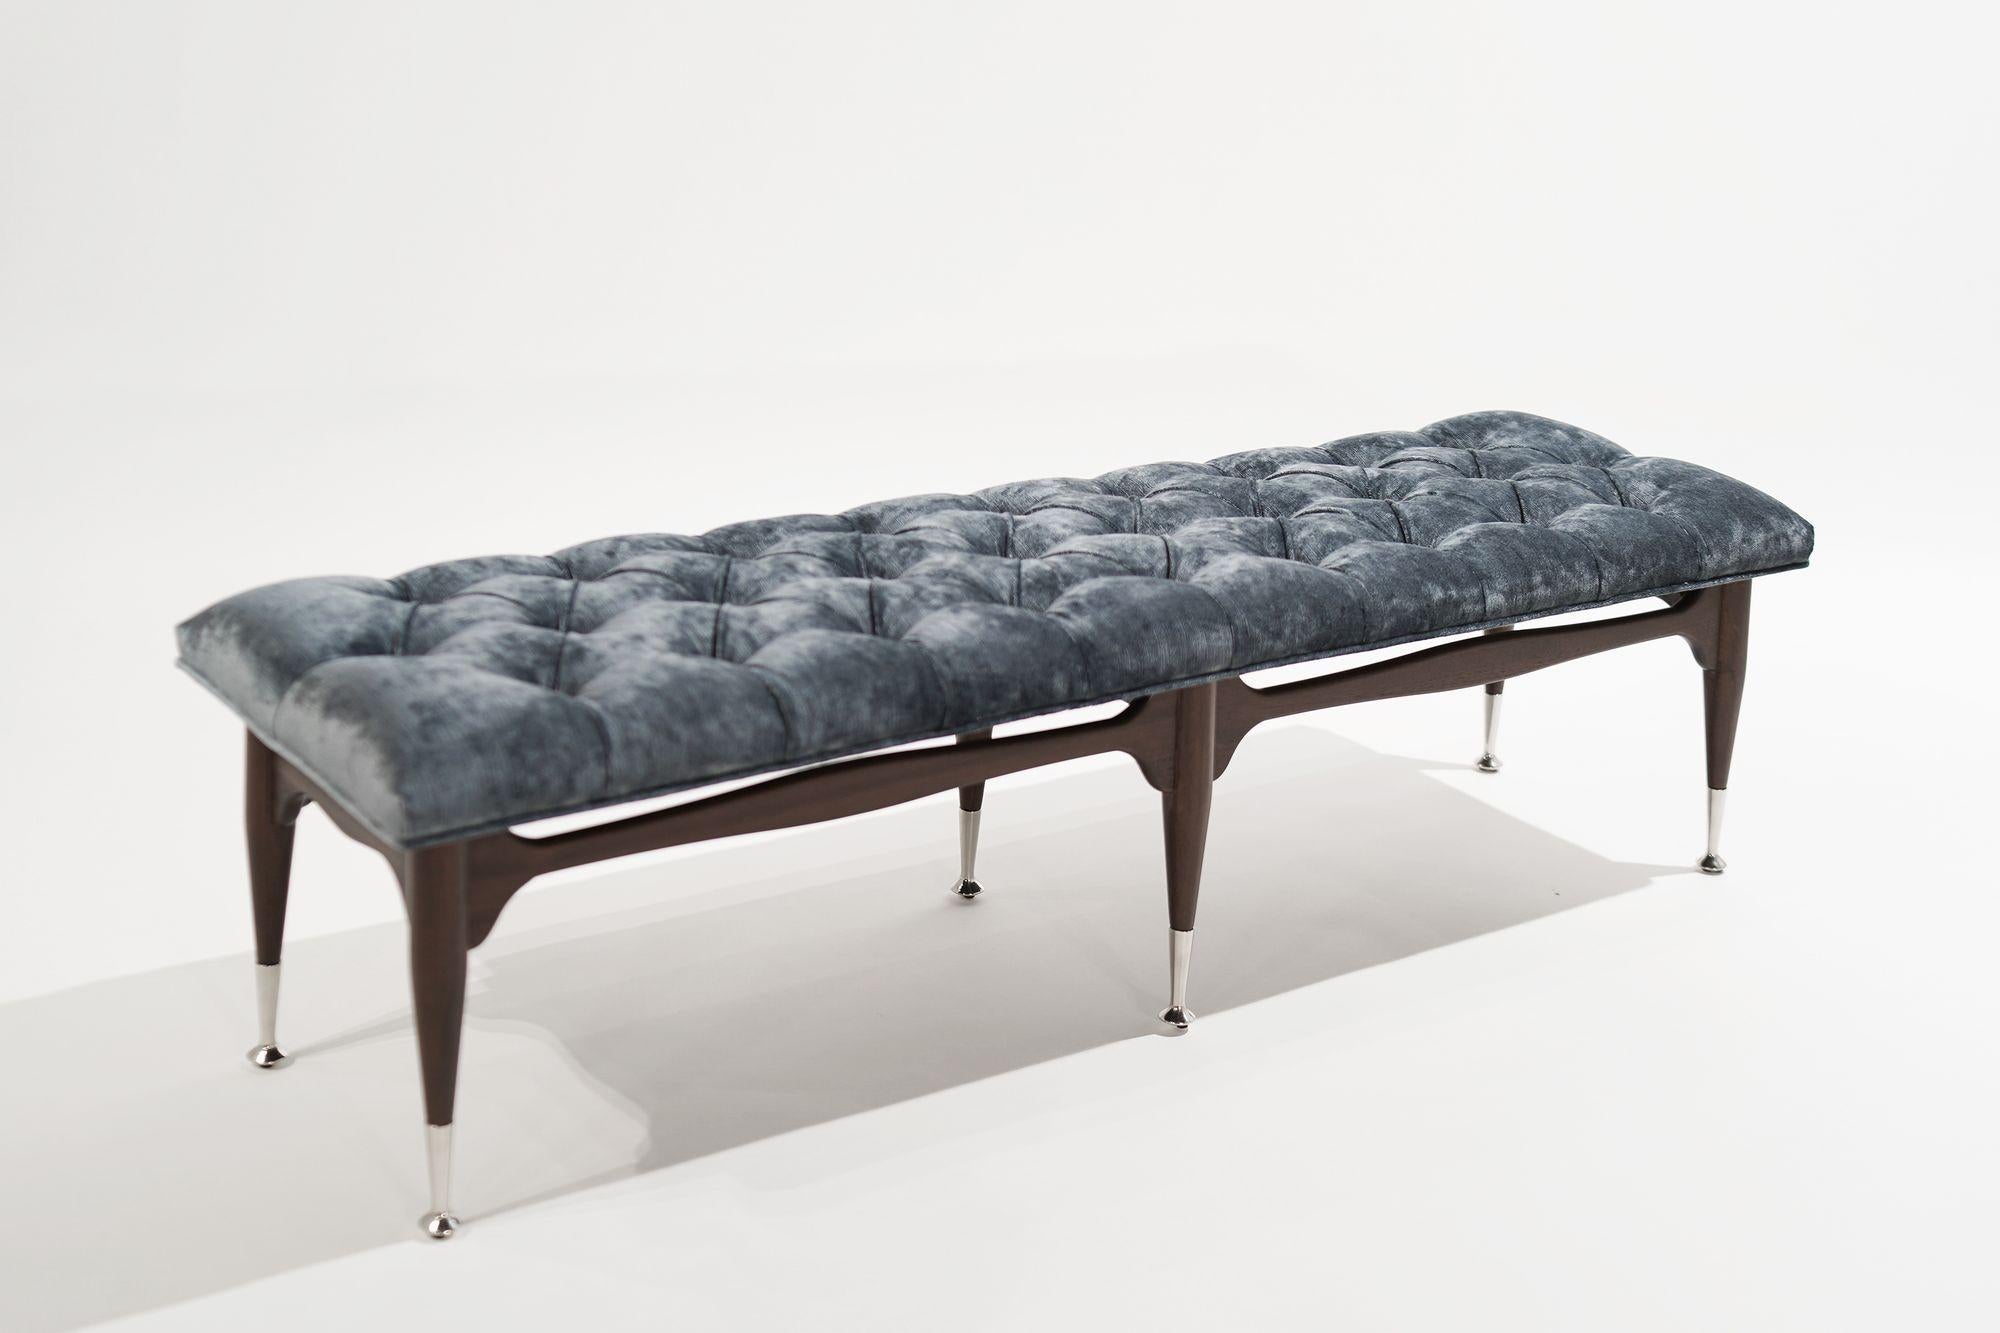 American Mid Century Modern Tufted Mahogany Bench, C. 1950s For Sale